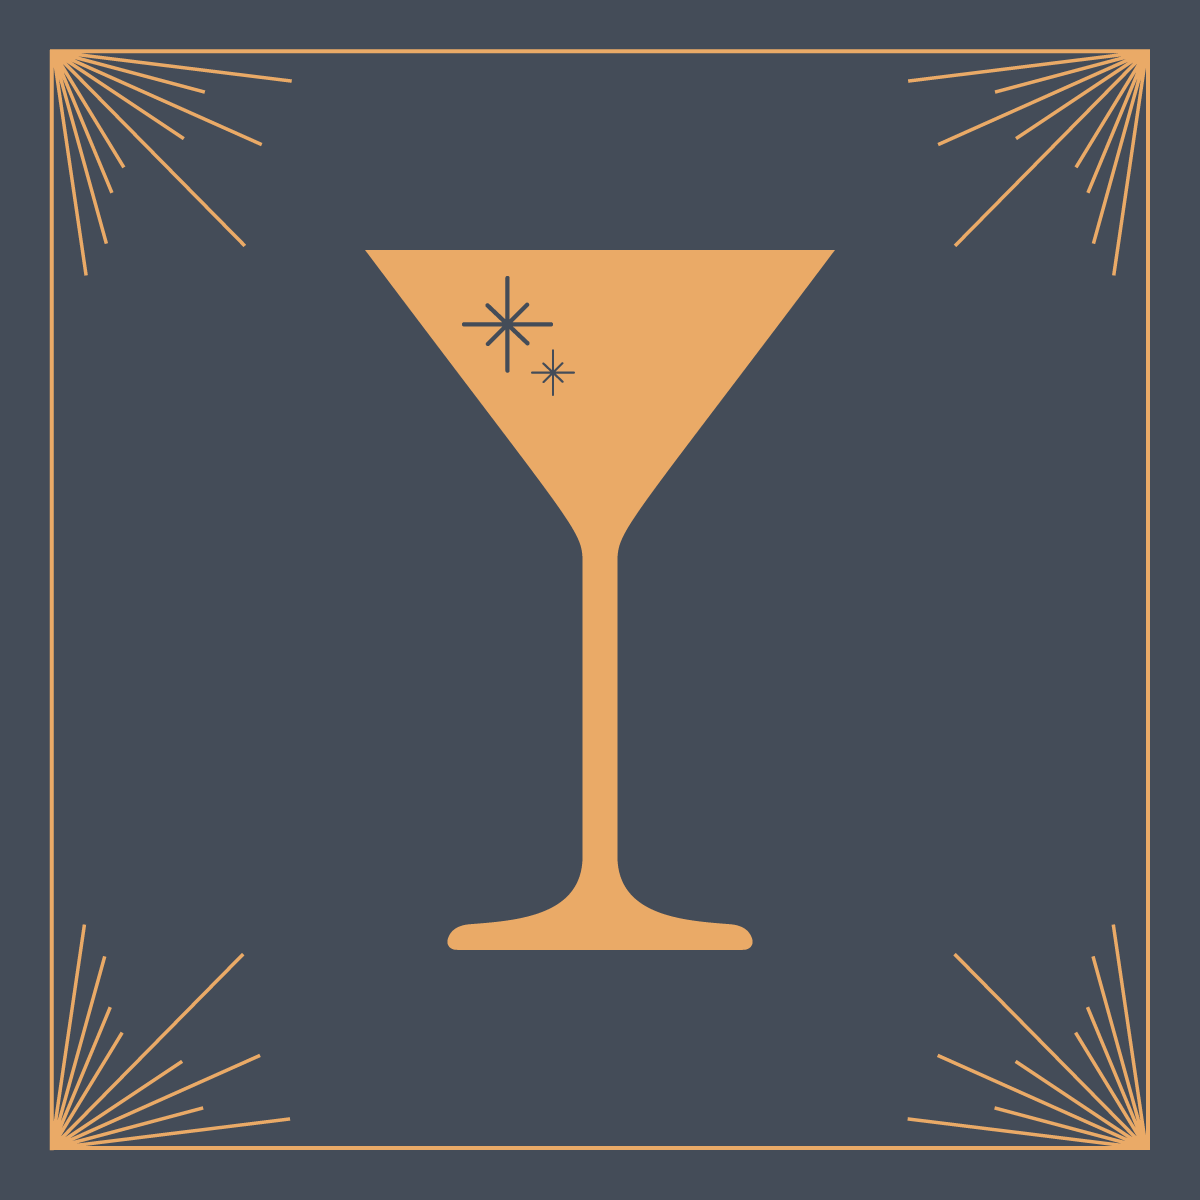 https://www.tasteofhome.com/wp-content/uploads/2021/11/martini-glass-silo.png?fit=700%2C700